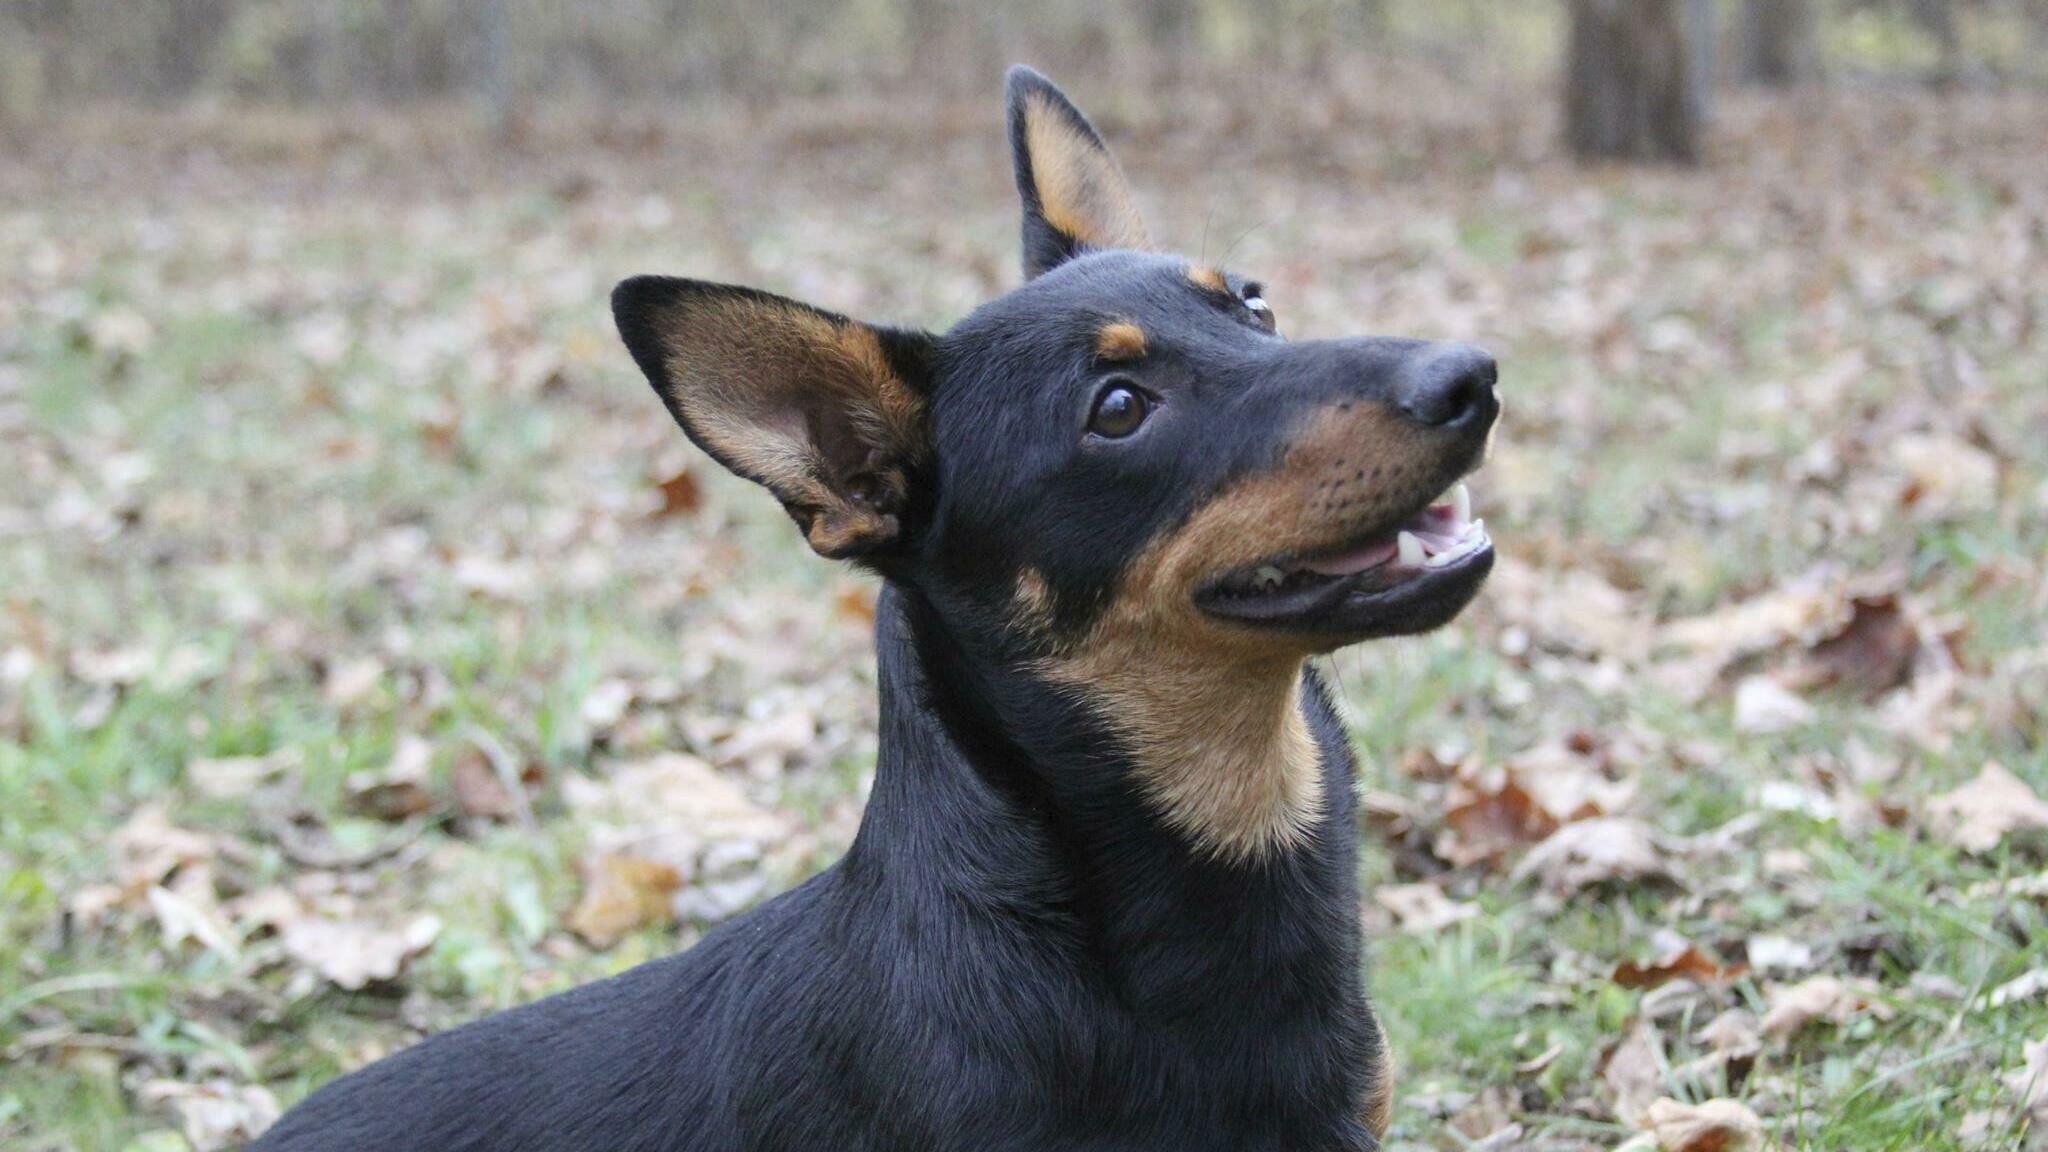 The Lancashire heeler, gritty and smart, is the latest American Kennel Club breed